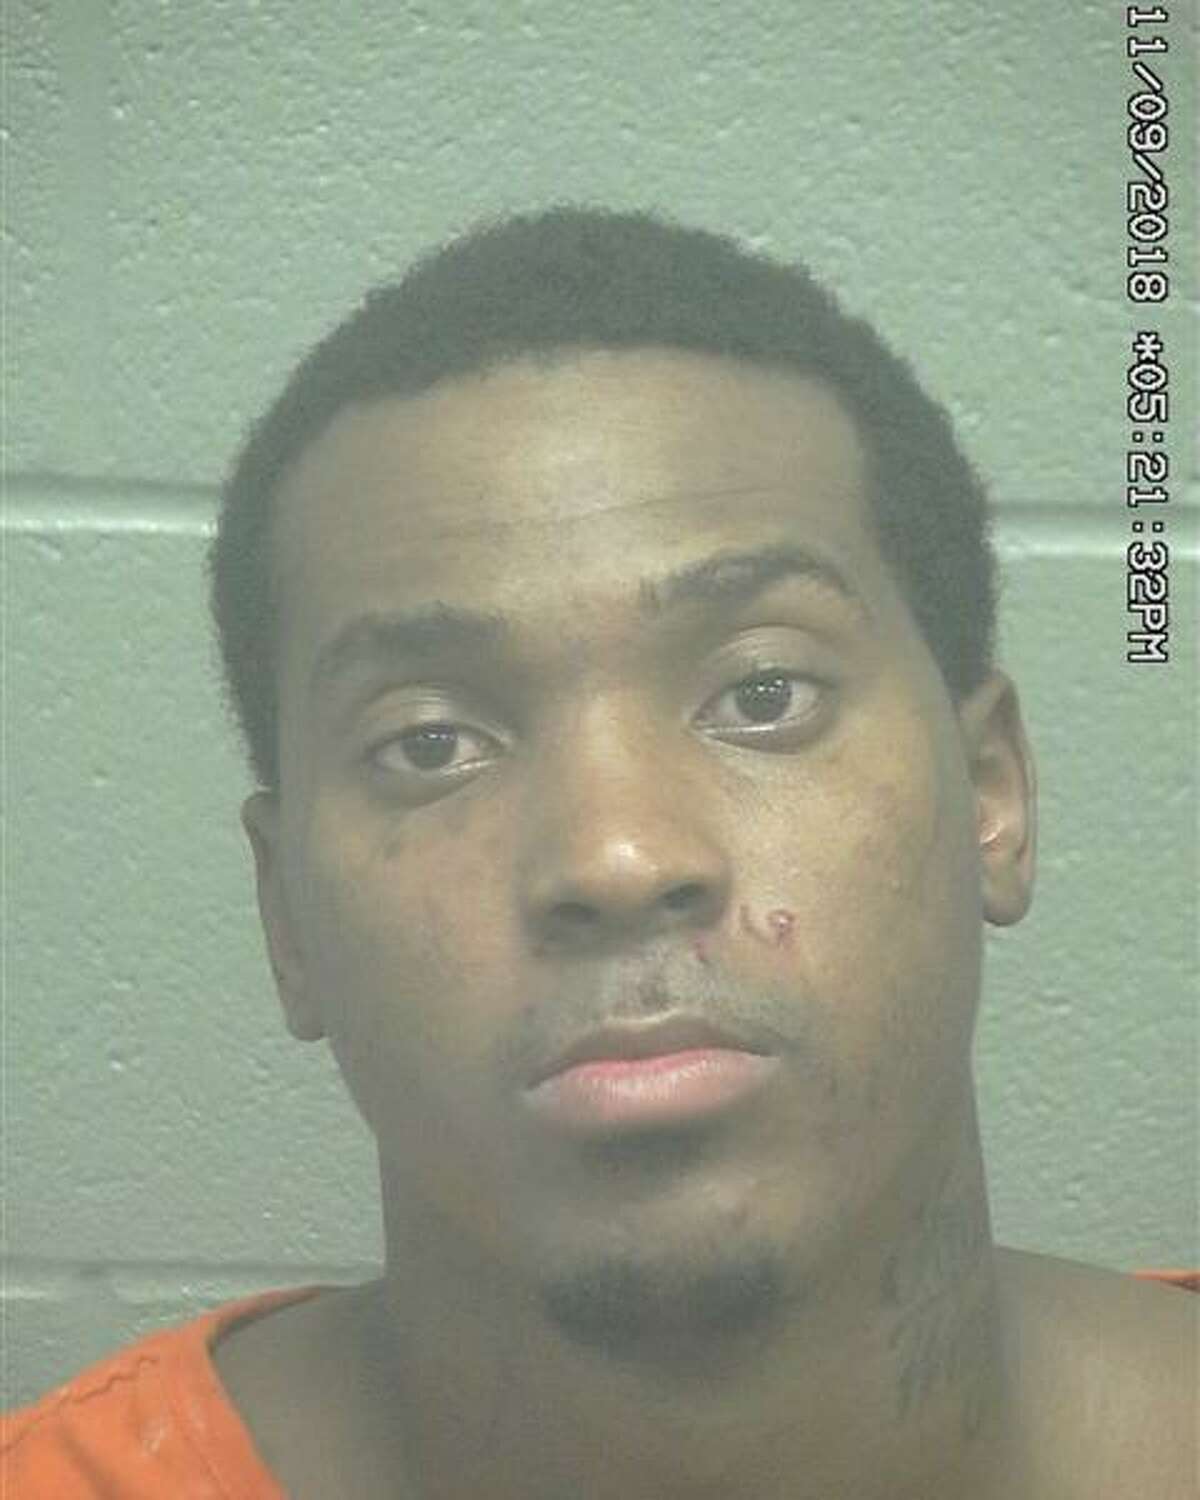 Adrian Wade Roberson, 26, was arrested Sept. 11 after allegedly assaulting a female, according to court documents.